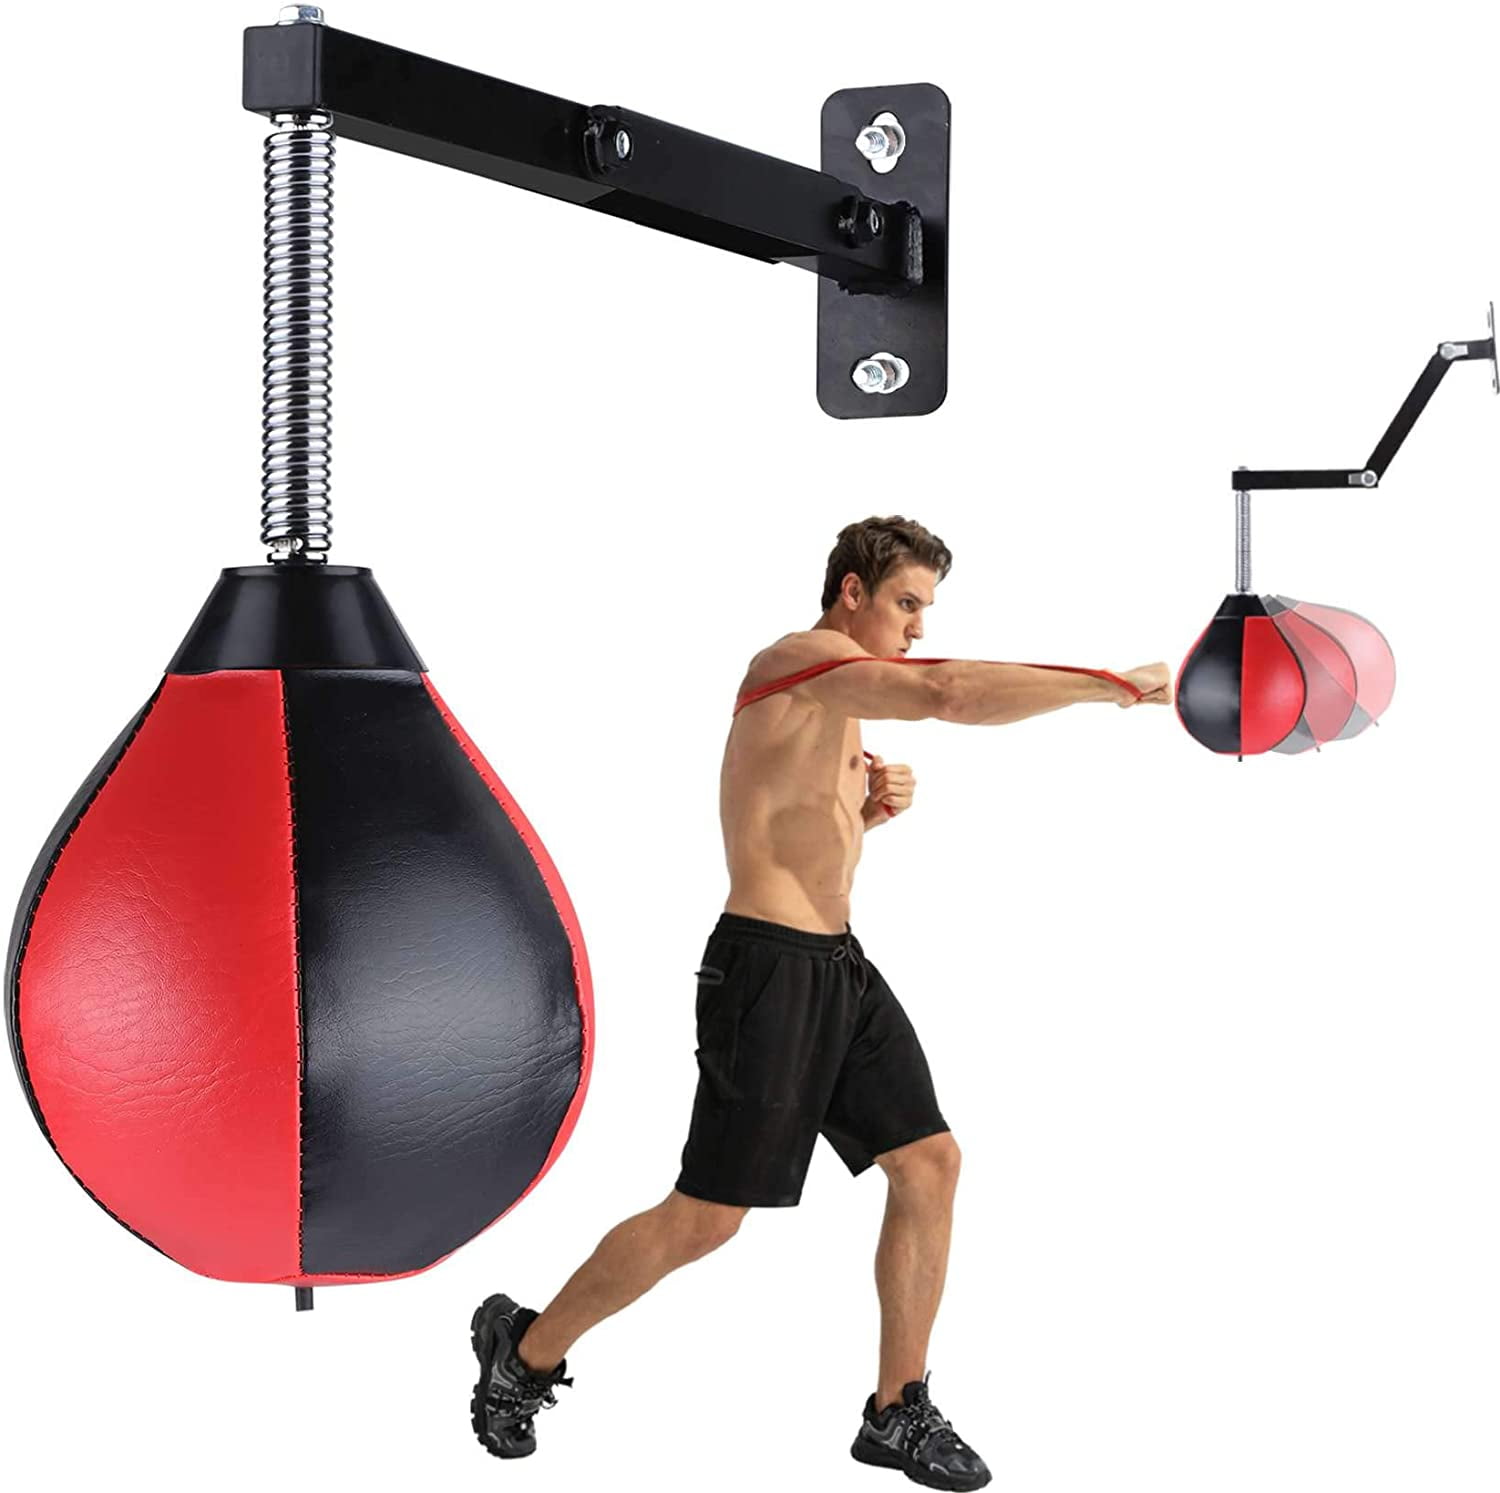 Boxing Speed Ball Punching Bag Workout Equipment for Exercise Body Building 